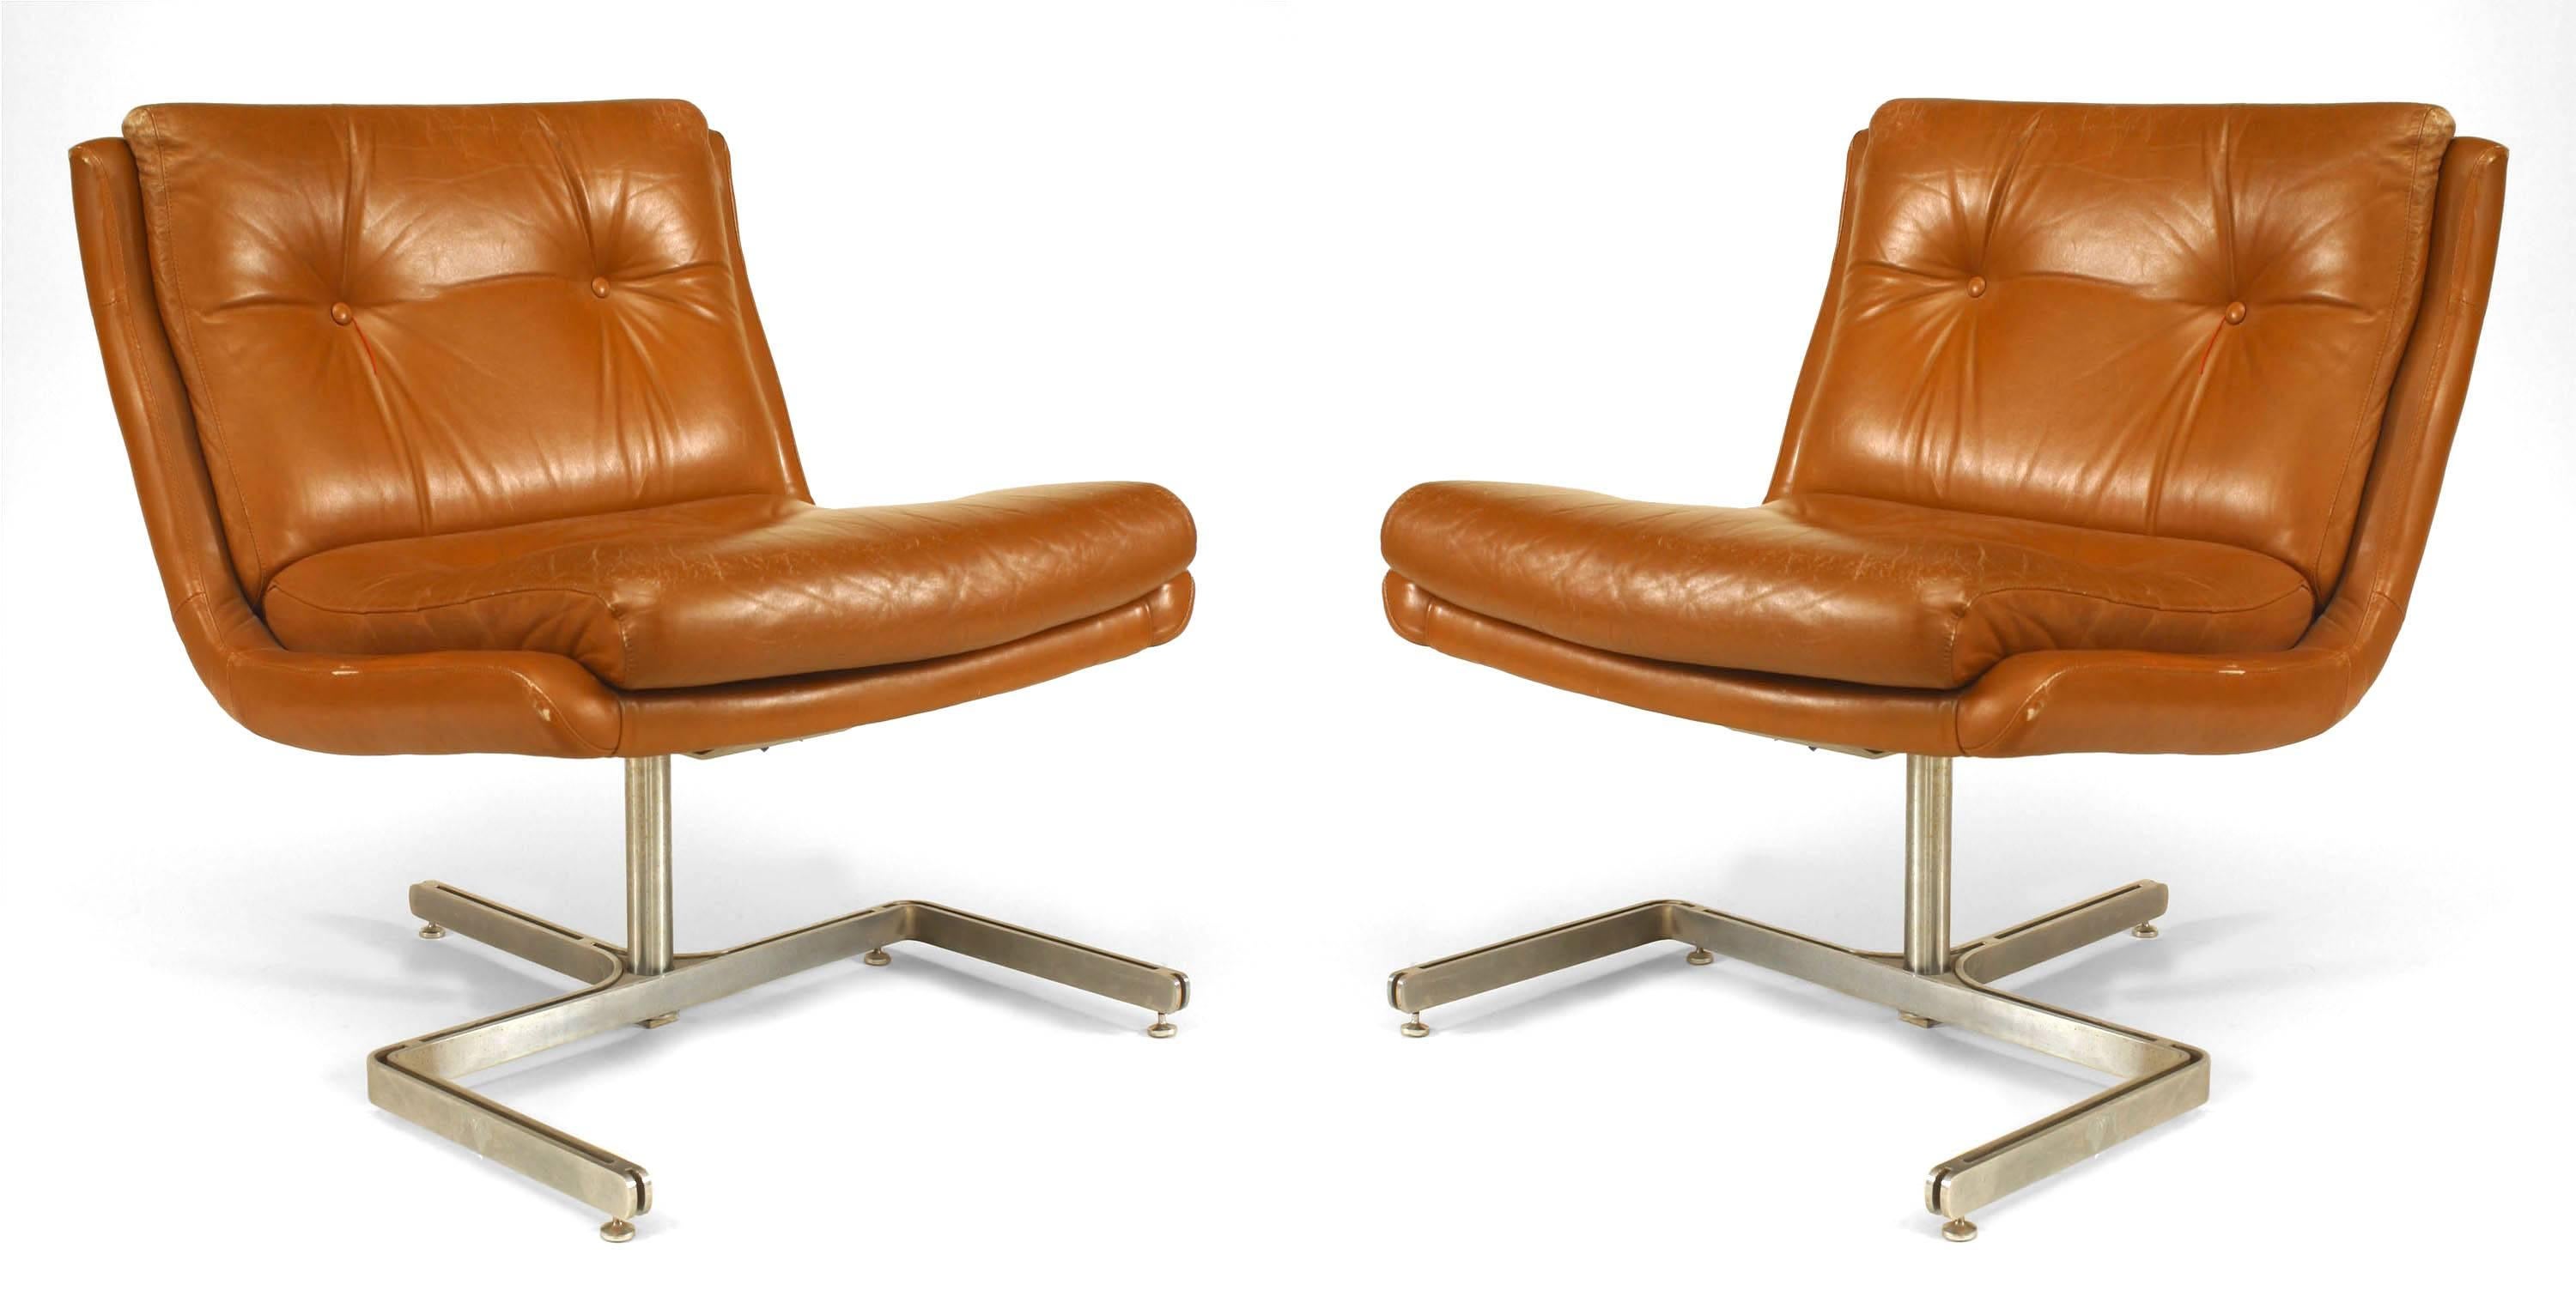 Pair of French Post-War Design side chairs with a scoop seat form supported on a steel pedestal ending in a 3 prong base with brown leather seat and tufted back (att: RAPHAEL)
